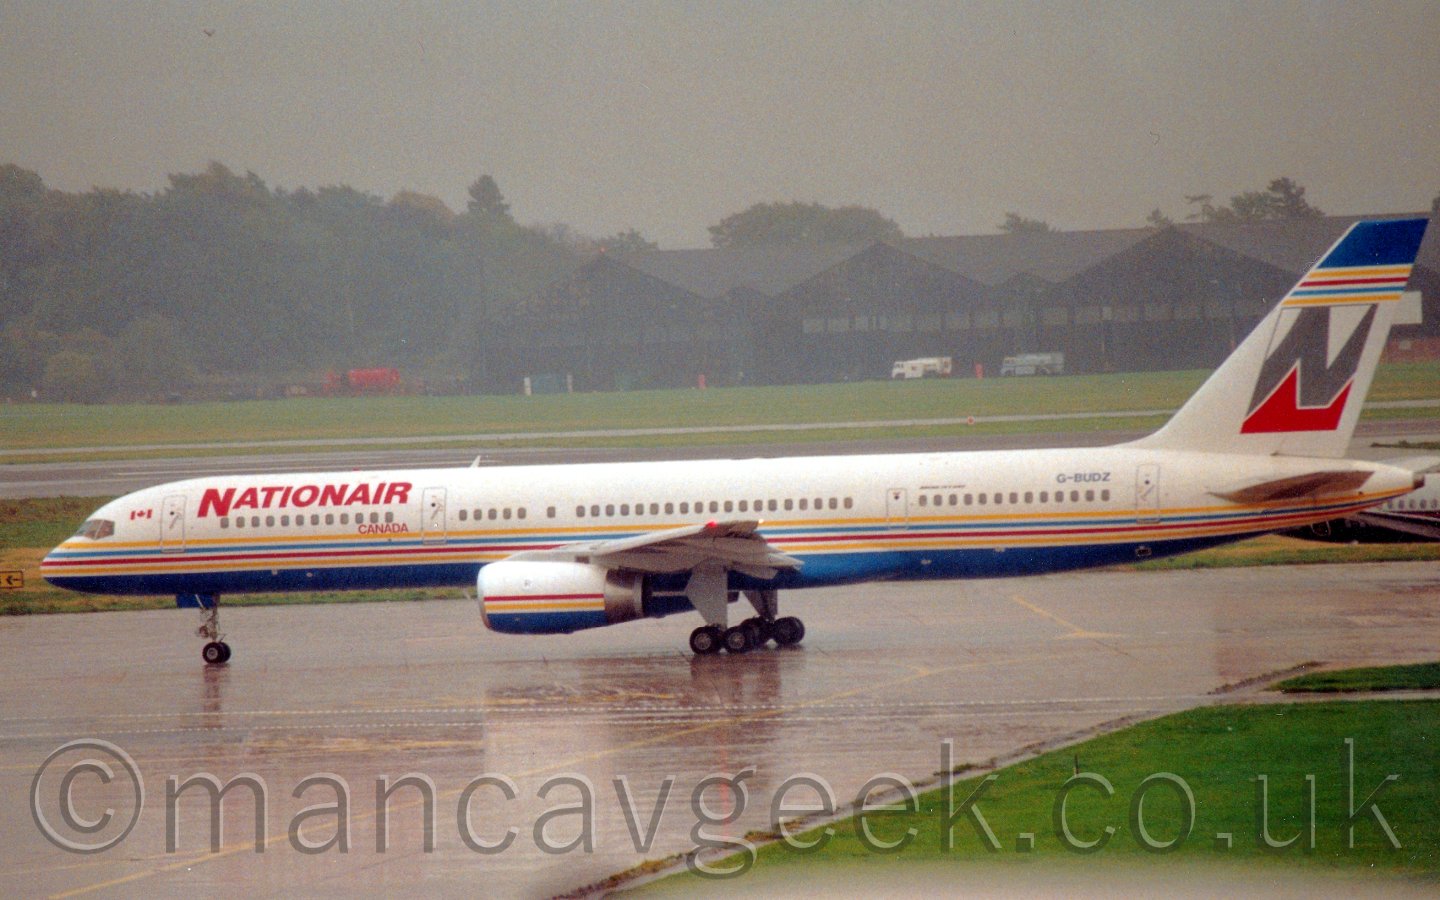 Side view of a white and blue twin engined jet airliner with a white, grey, and red tail, taxiing from right to left at a rather damp airport, under a misty grey sky.